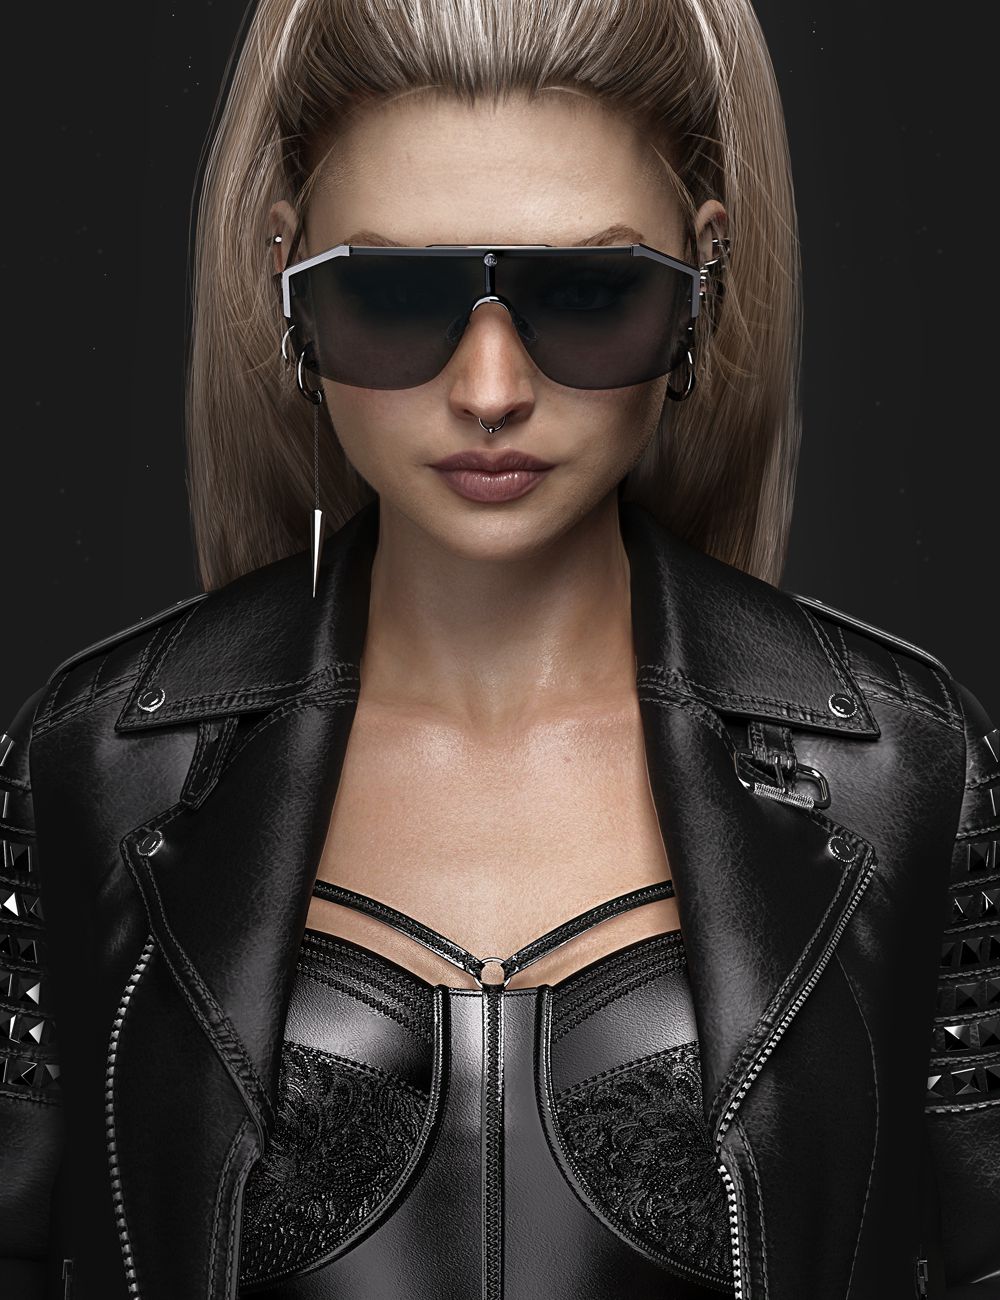 AJC Glamor Biker Outfit Earrings for Genesis 8 and 8.1 Females by: adeilsonjc, 3D Models by Daz 3D